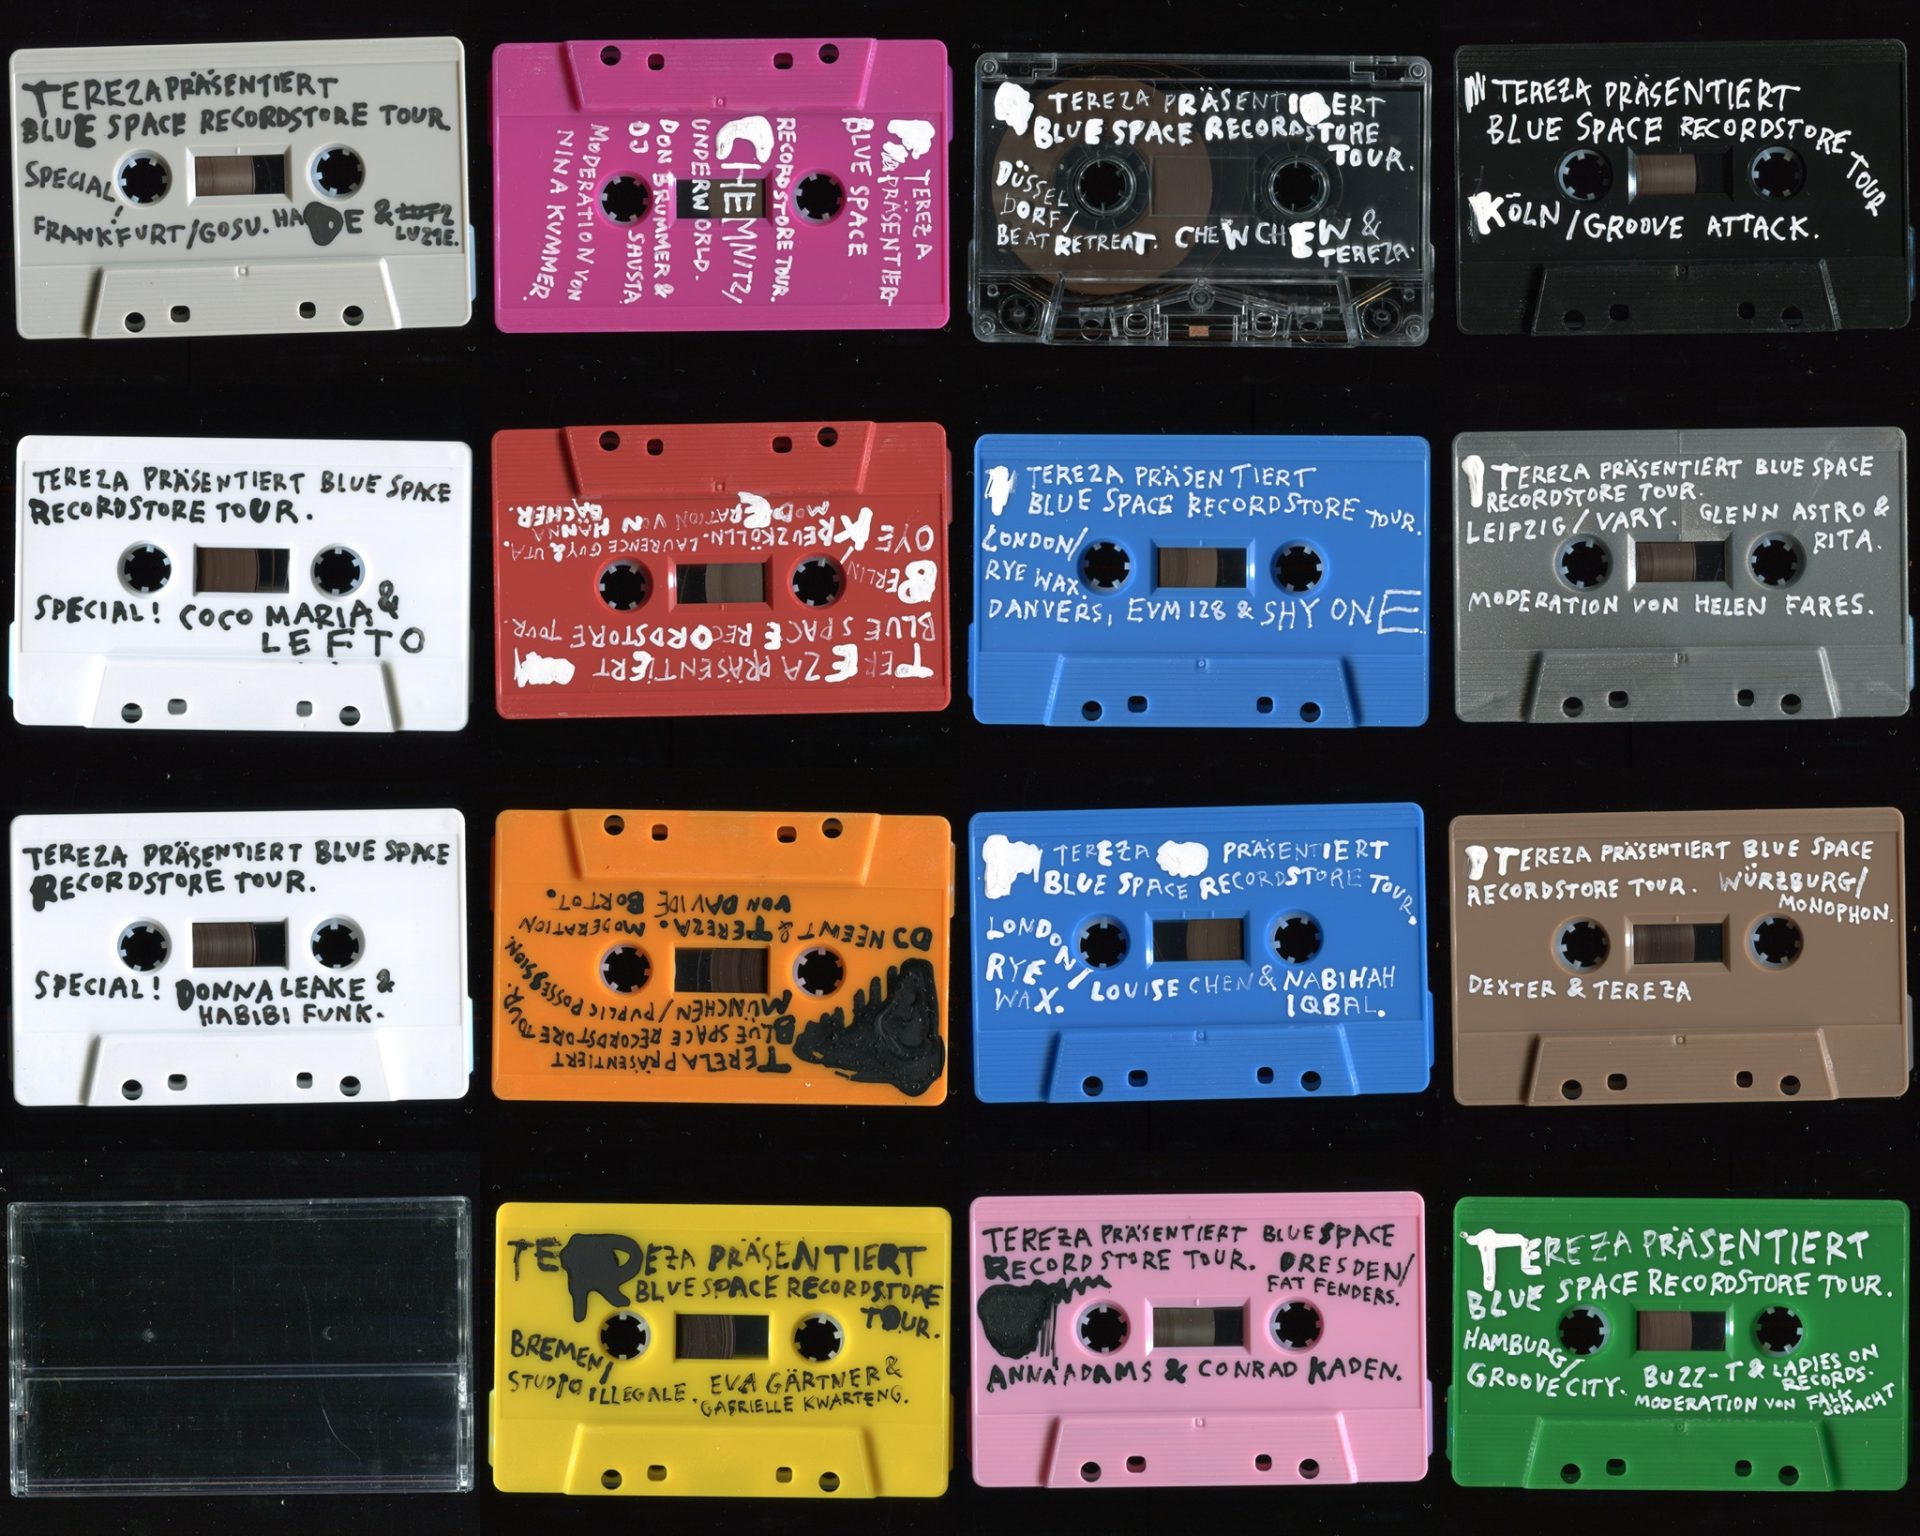 Cassettes for a Cause: Bid on Tapes with LeftO, Dexter, Habibi Funk, Glenn Astro & others to Support an Anti-Discrimination Charity